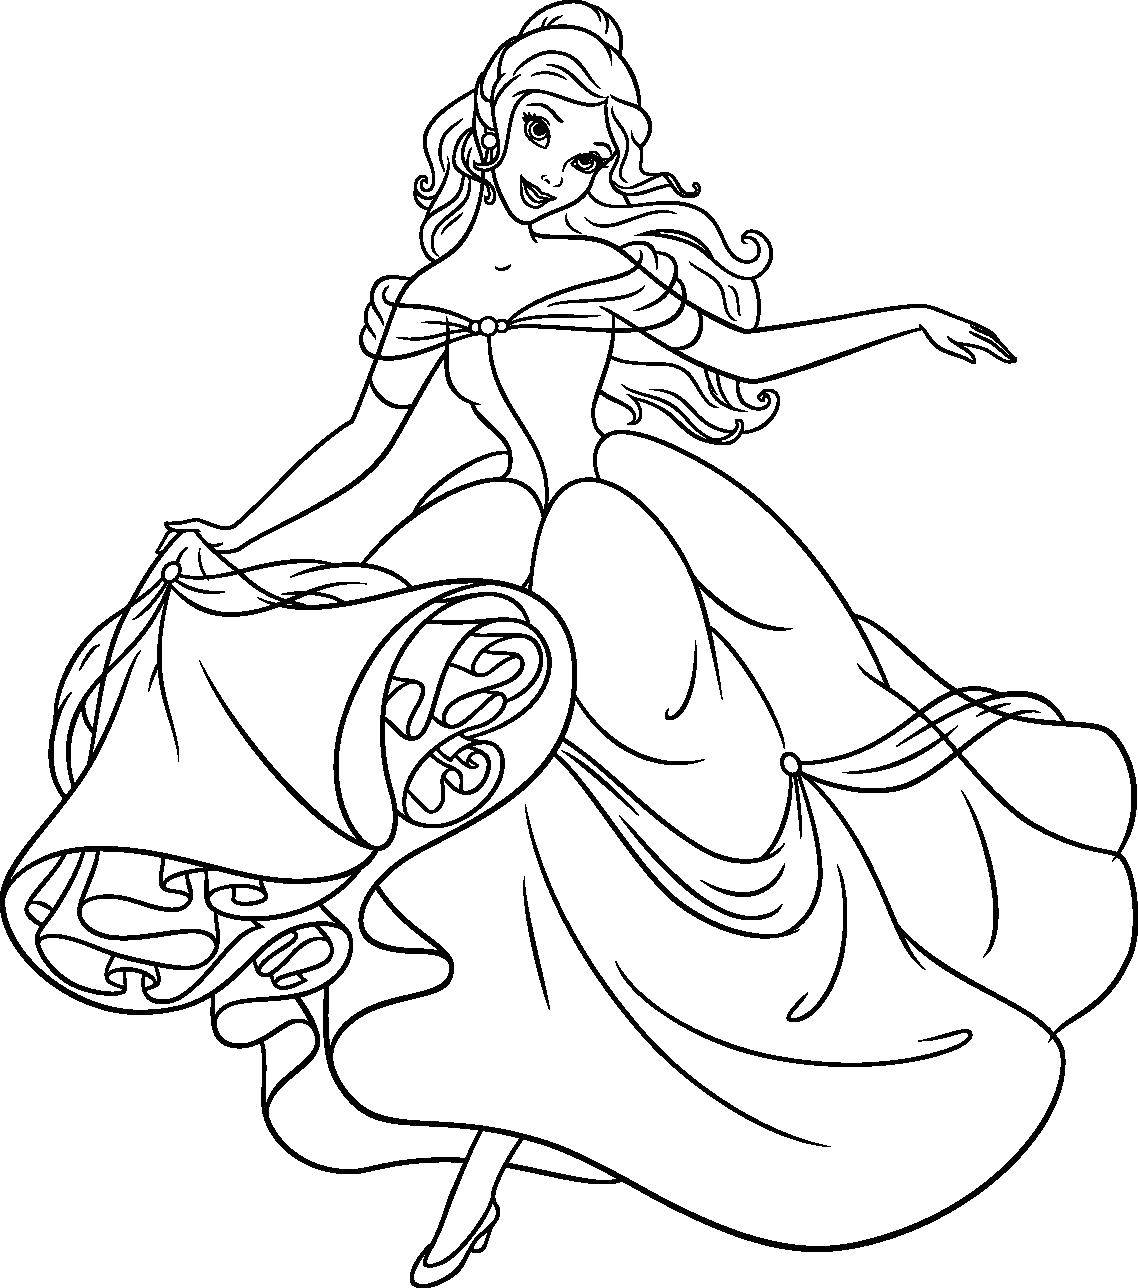 Coloring Beauty and the beast. Category Princess. Tags:  Princess , tale, cartoon, beauty and the Beast.